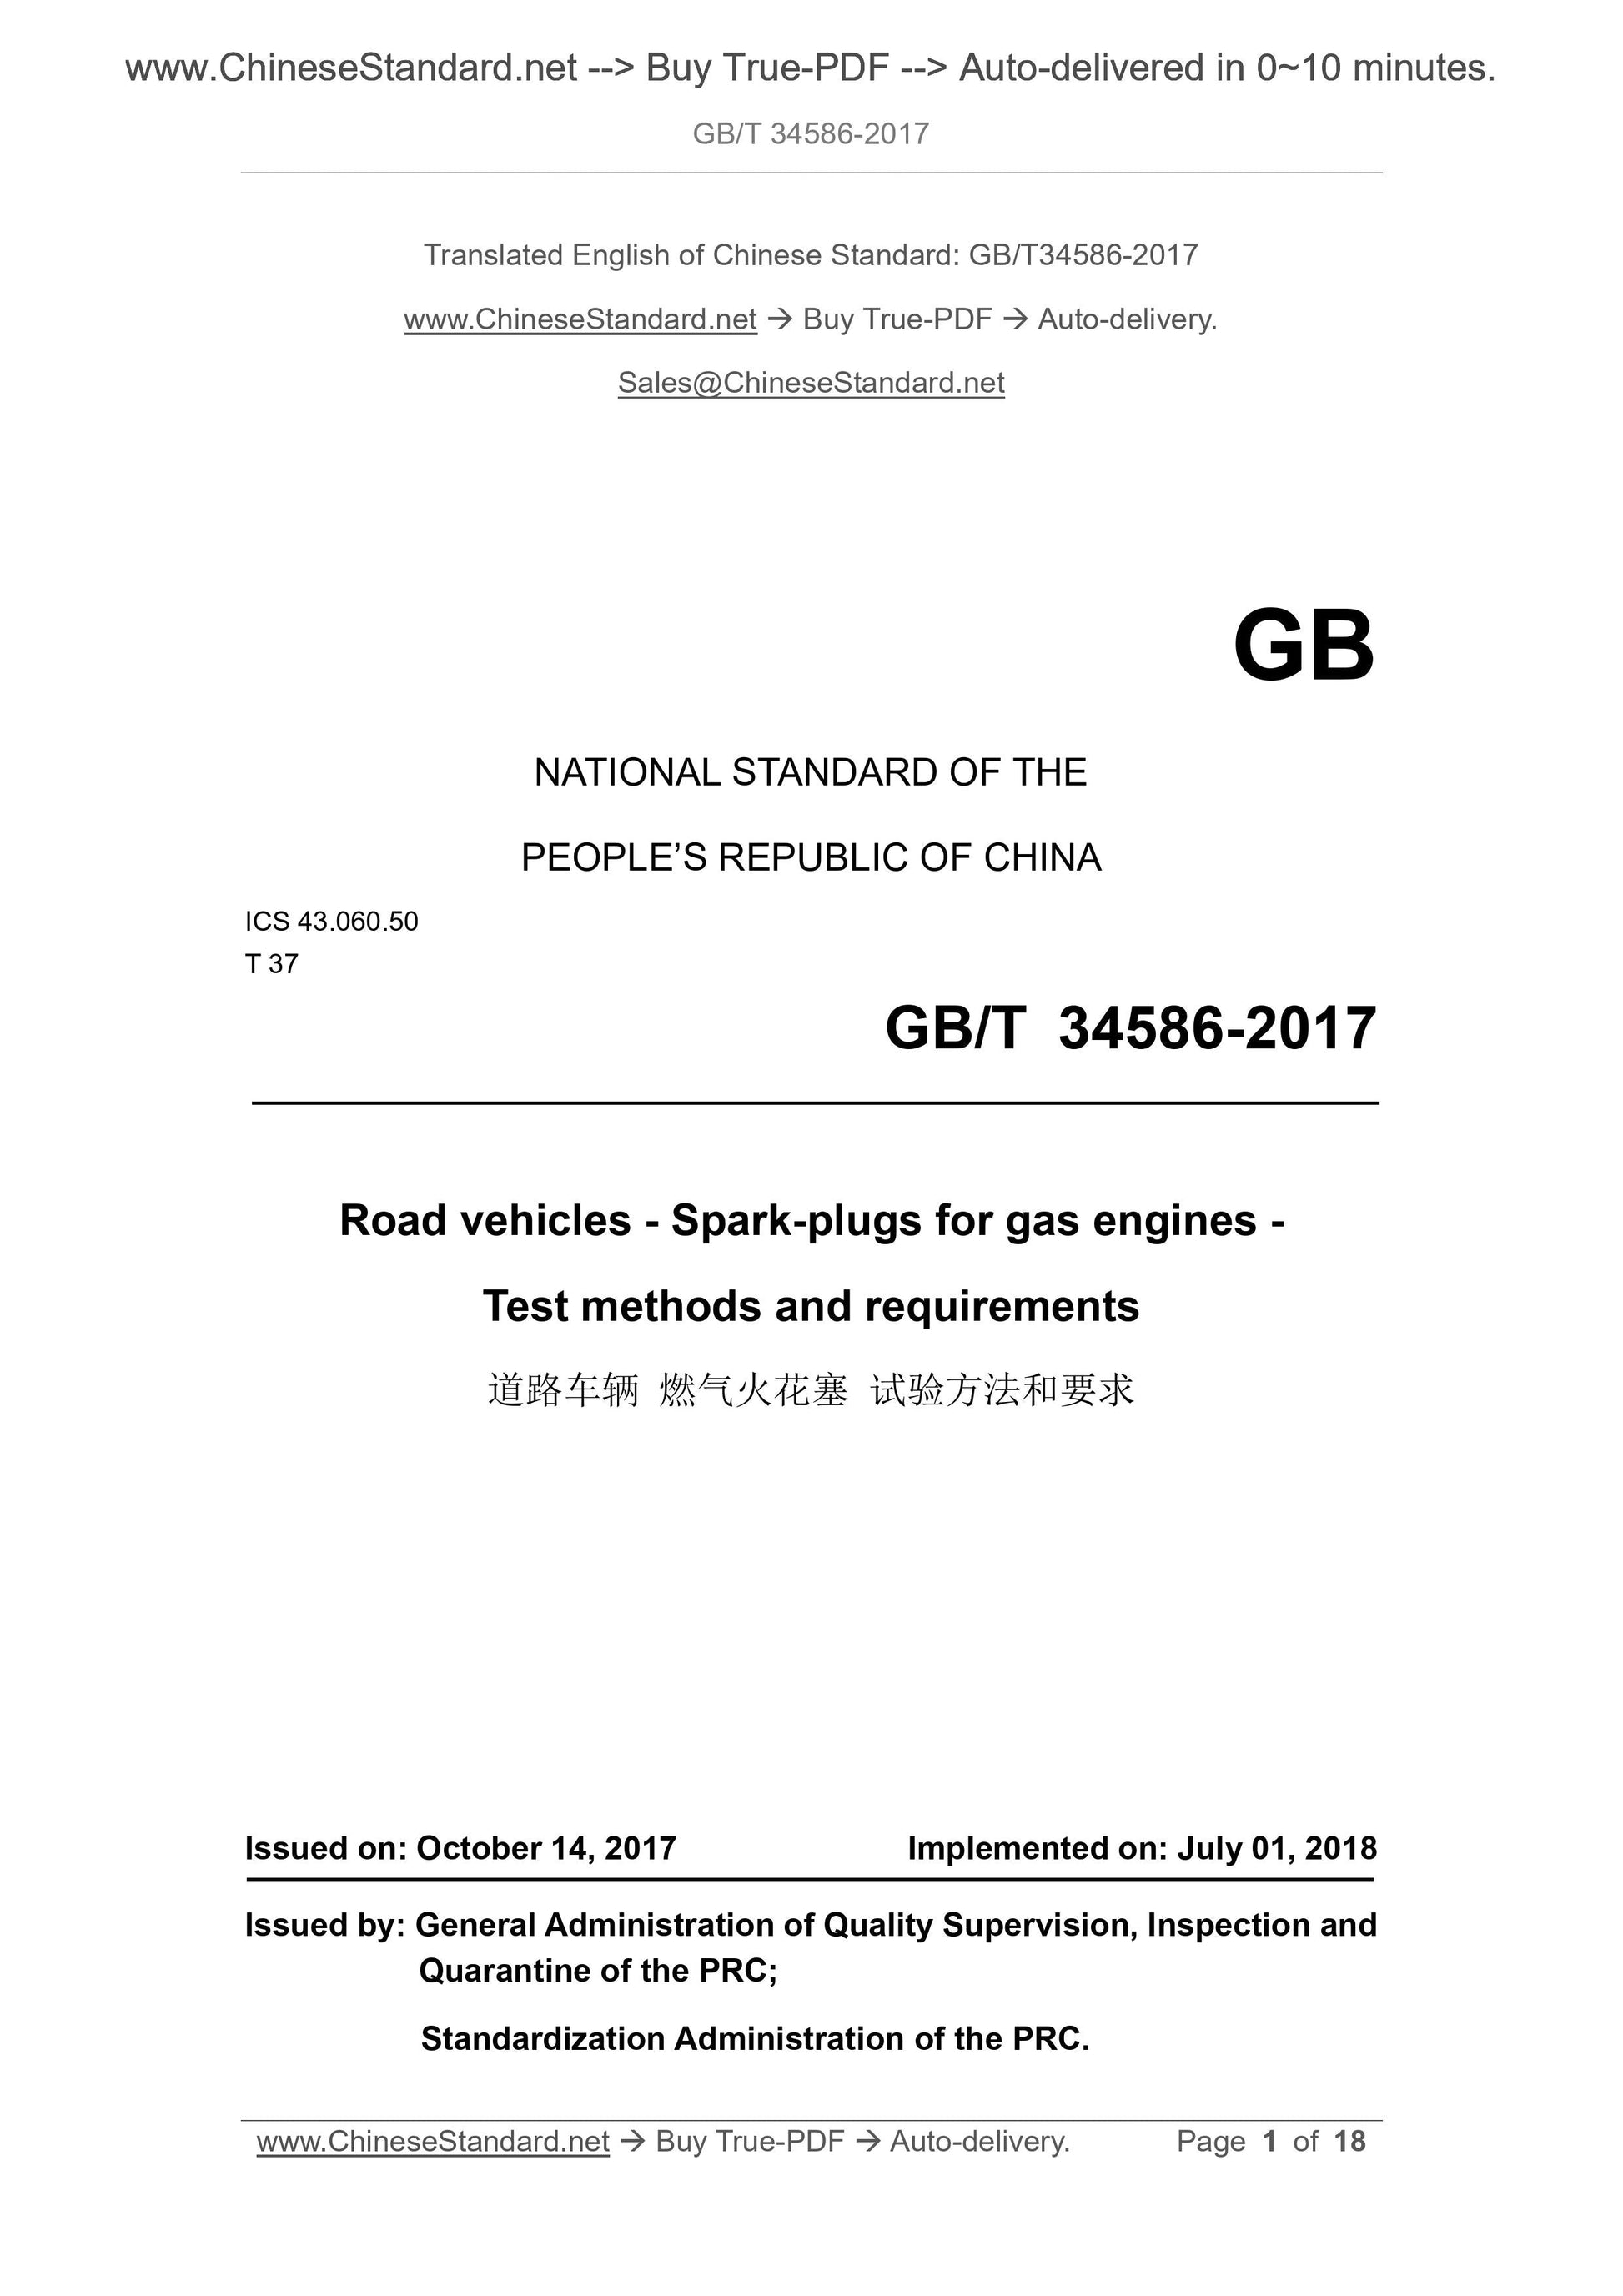 GB/T 34586-2017 Page 1